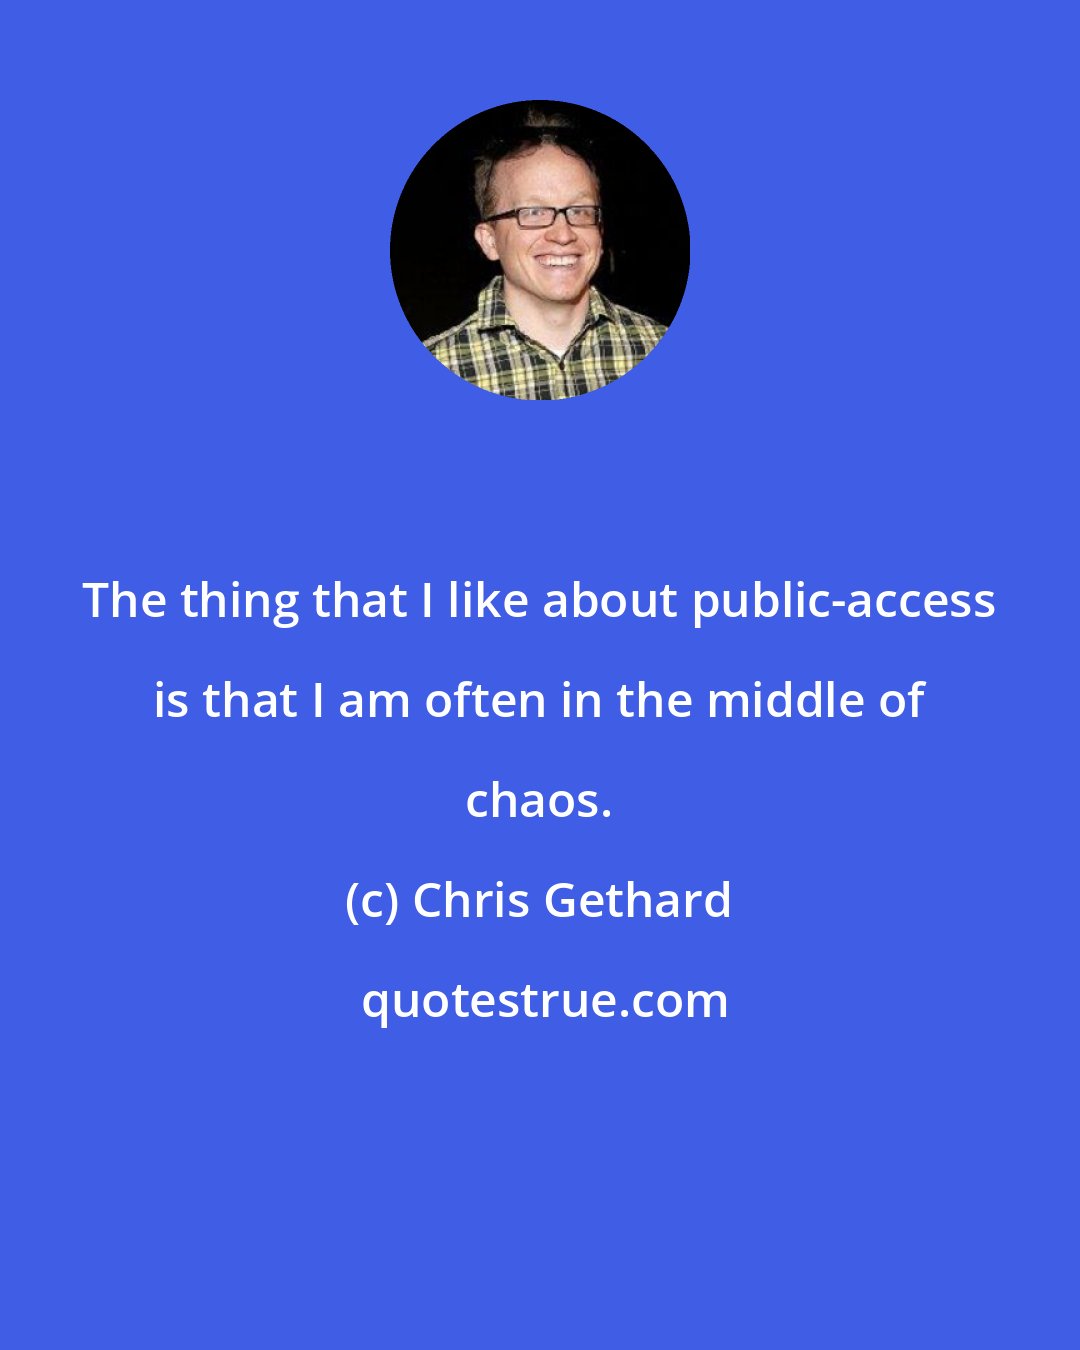 Chris Gethard: The thing that I like about public-access is that I am often in the middle of chaos.